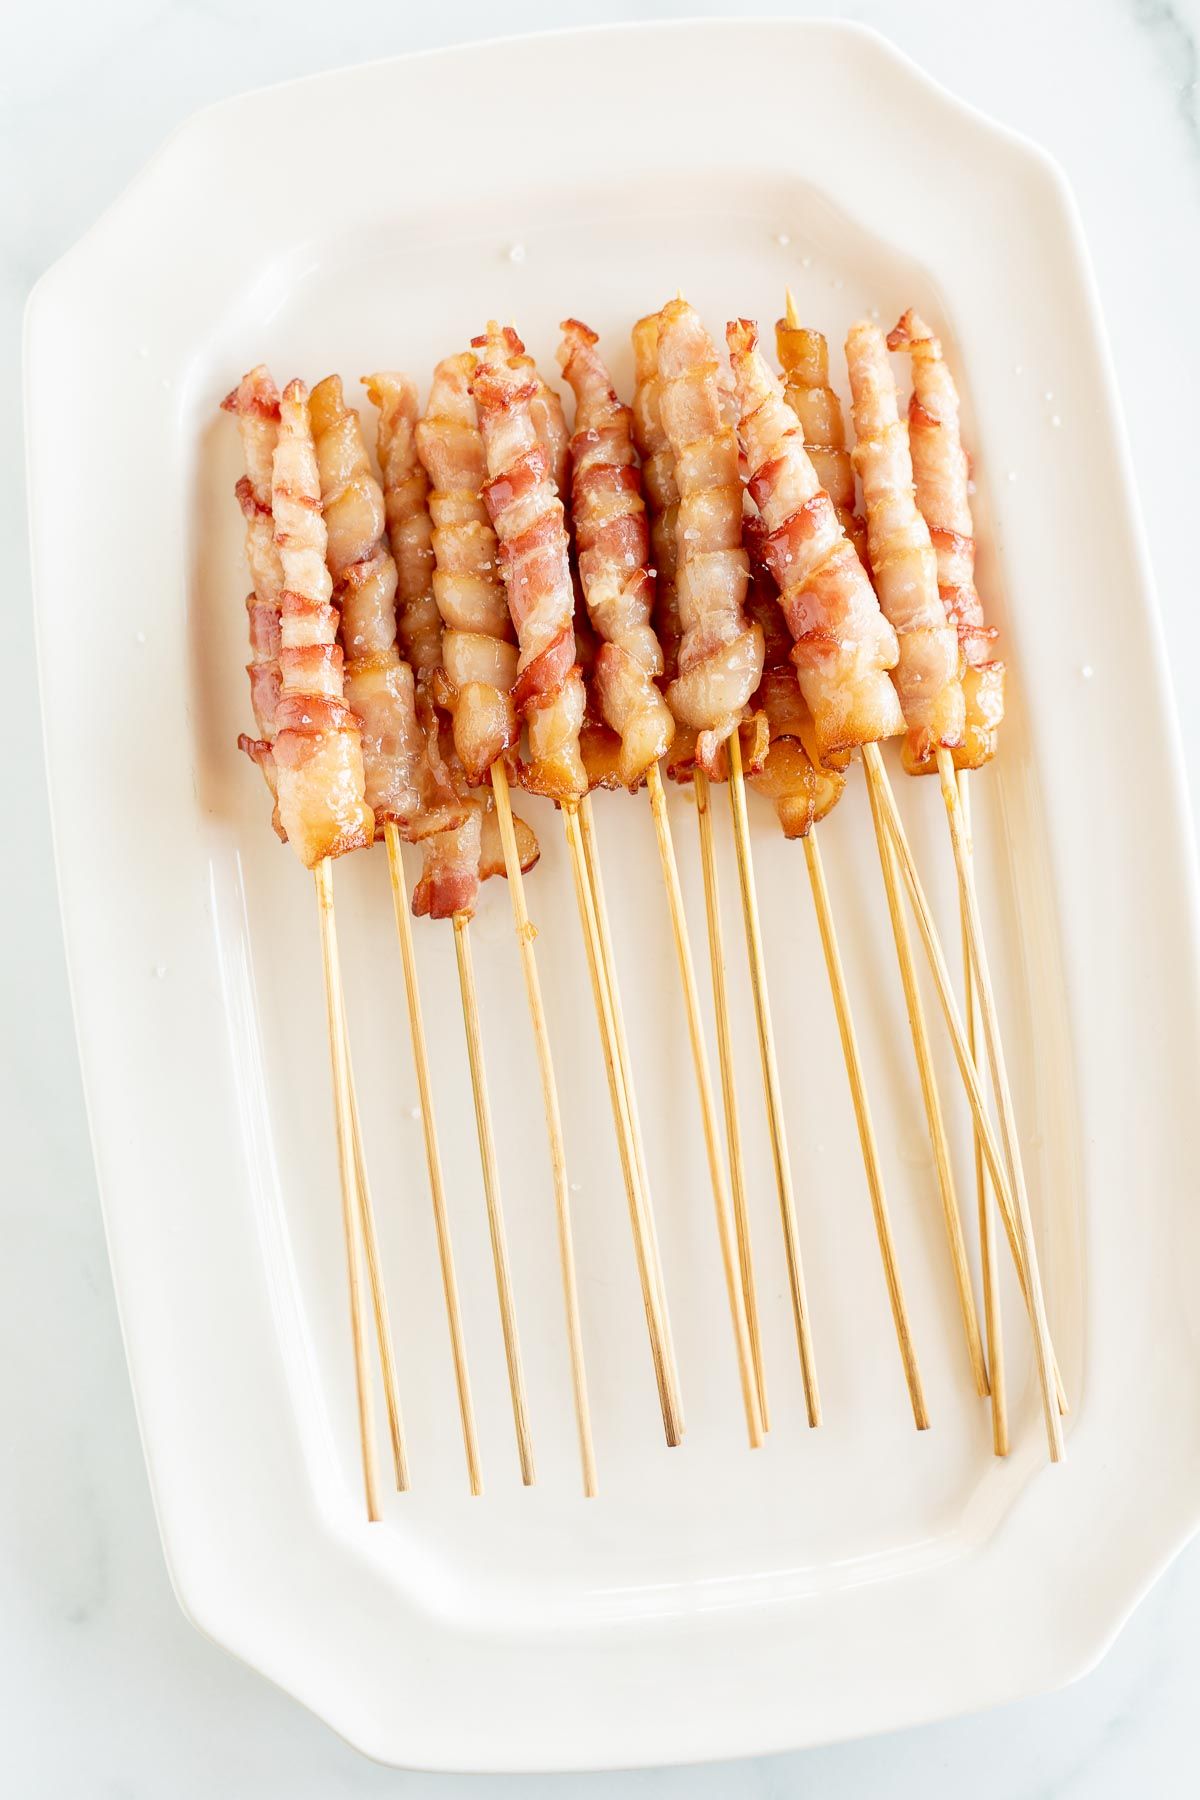 Caramelized bacon skewers on a white platter.